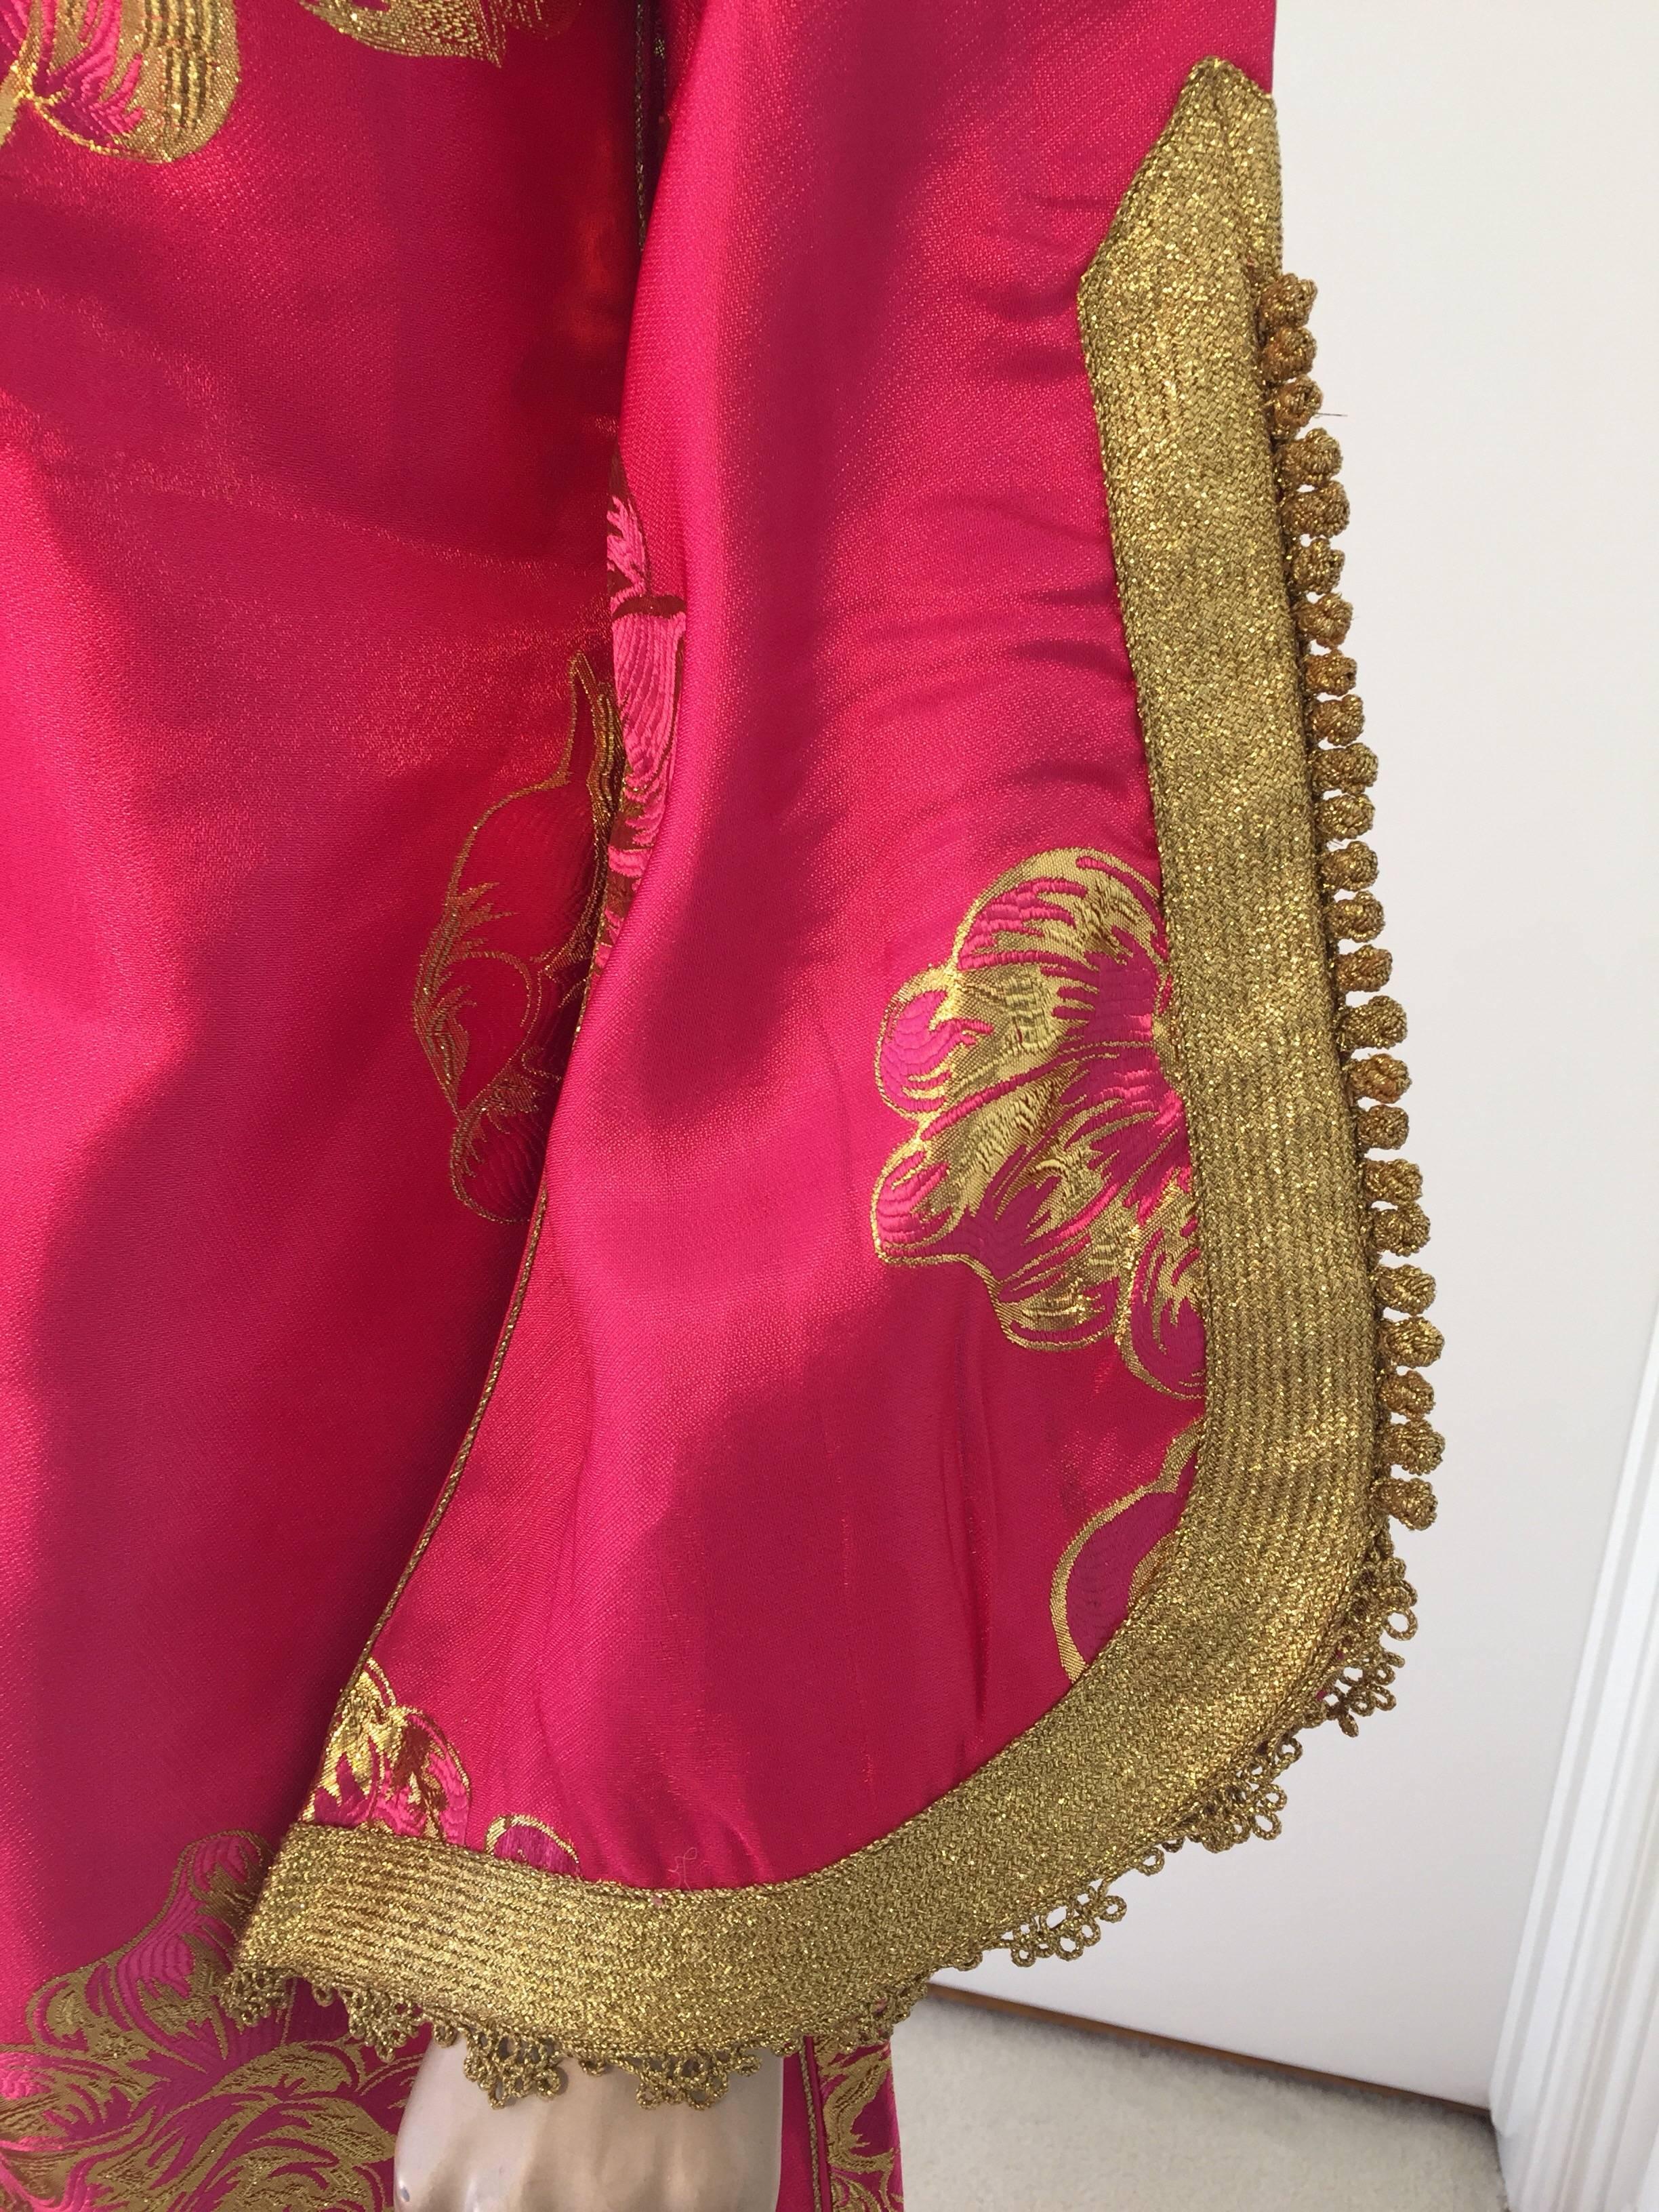 Hand-Crafted Vintage Designer Moroccan Kaftan, Embroidered Brocade Caftan with Pink and Gold